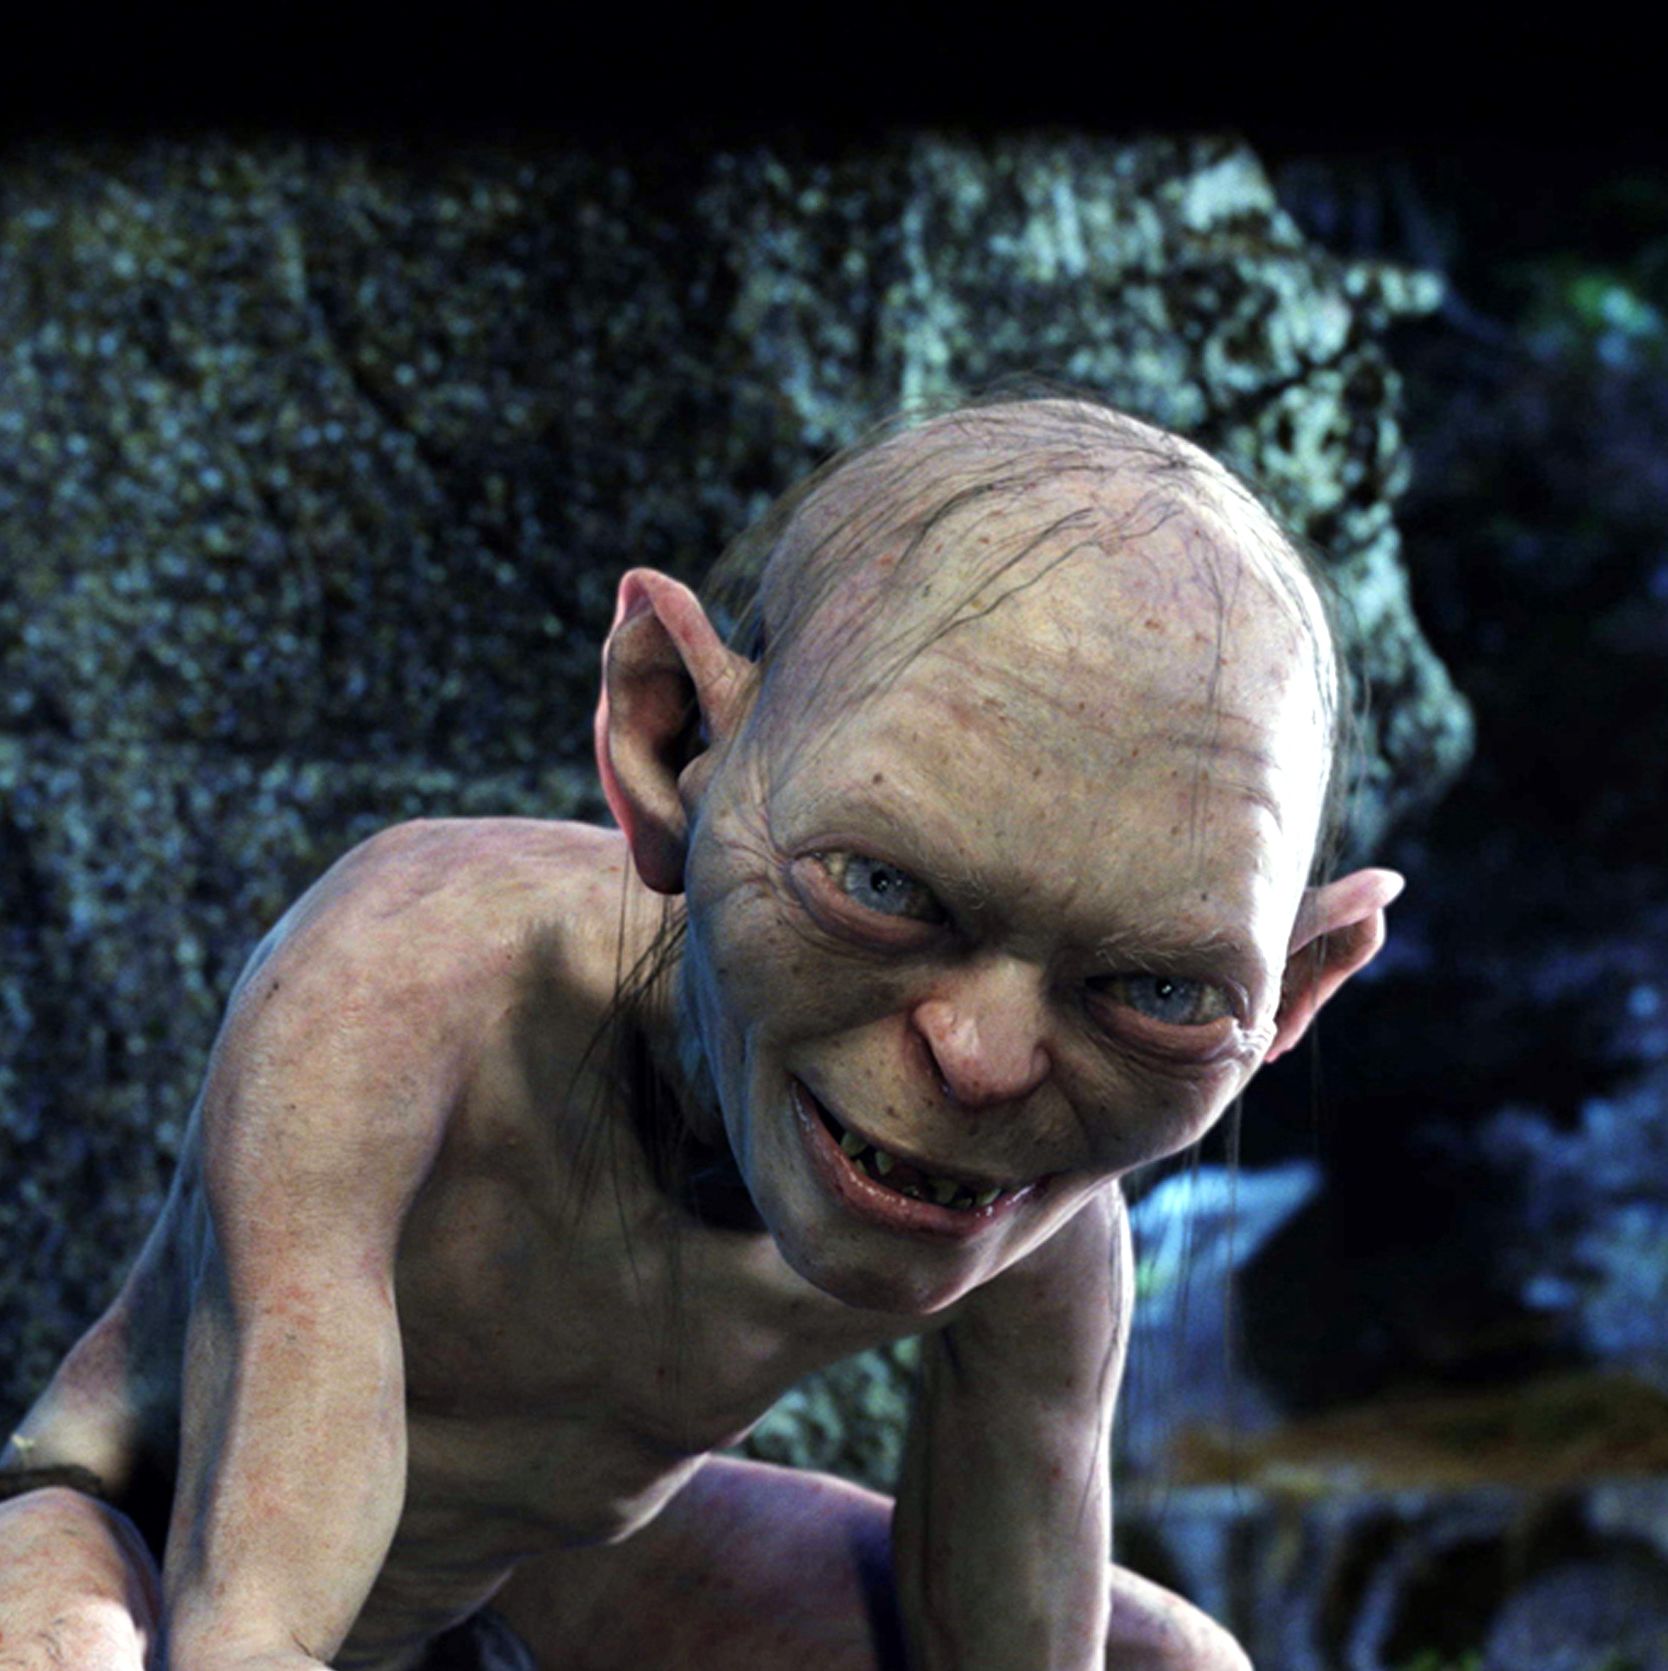 The Lord of the Rings: Gollum' Game Announcement